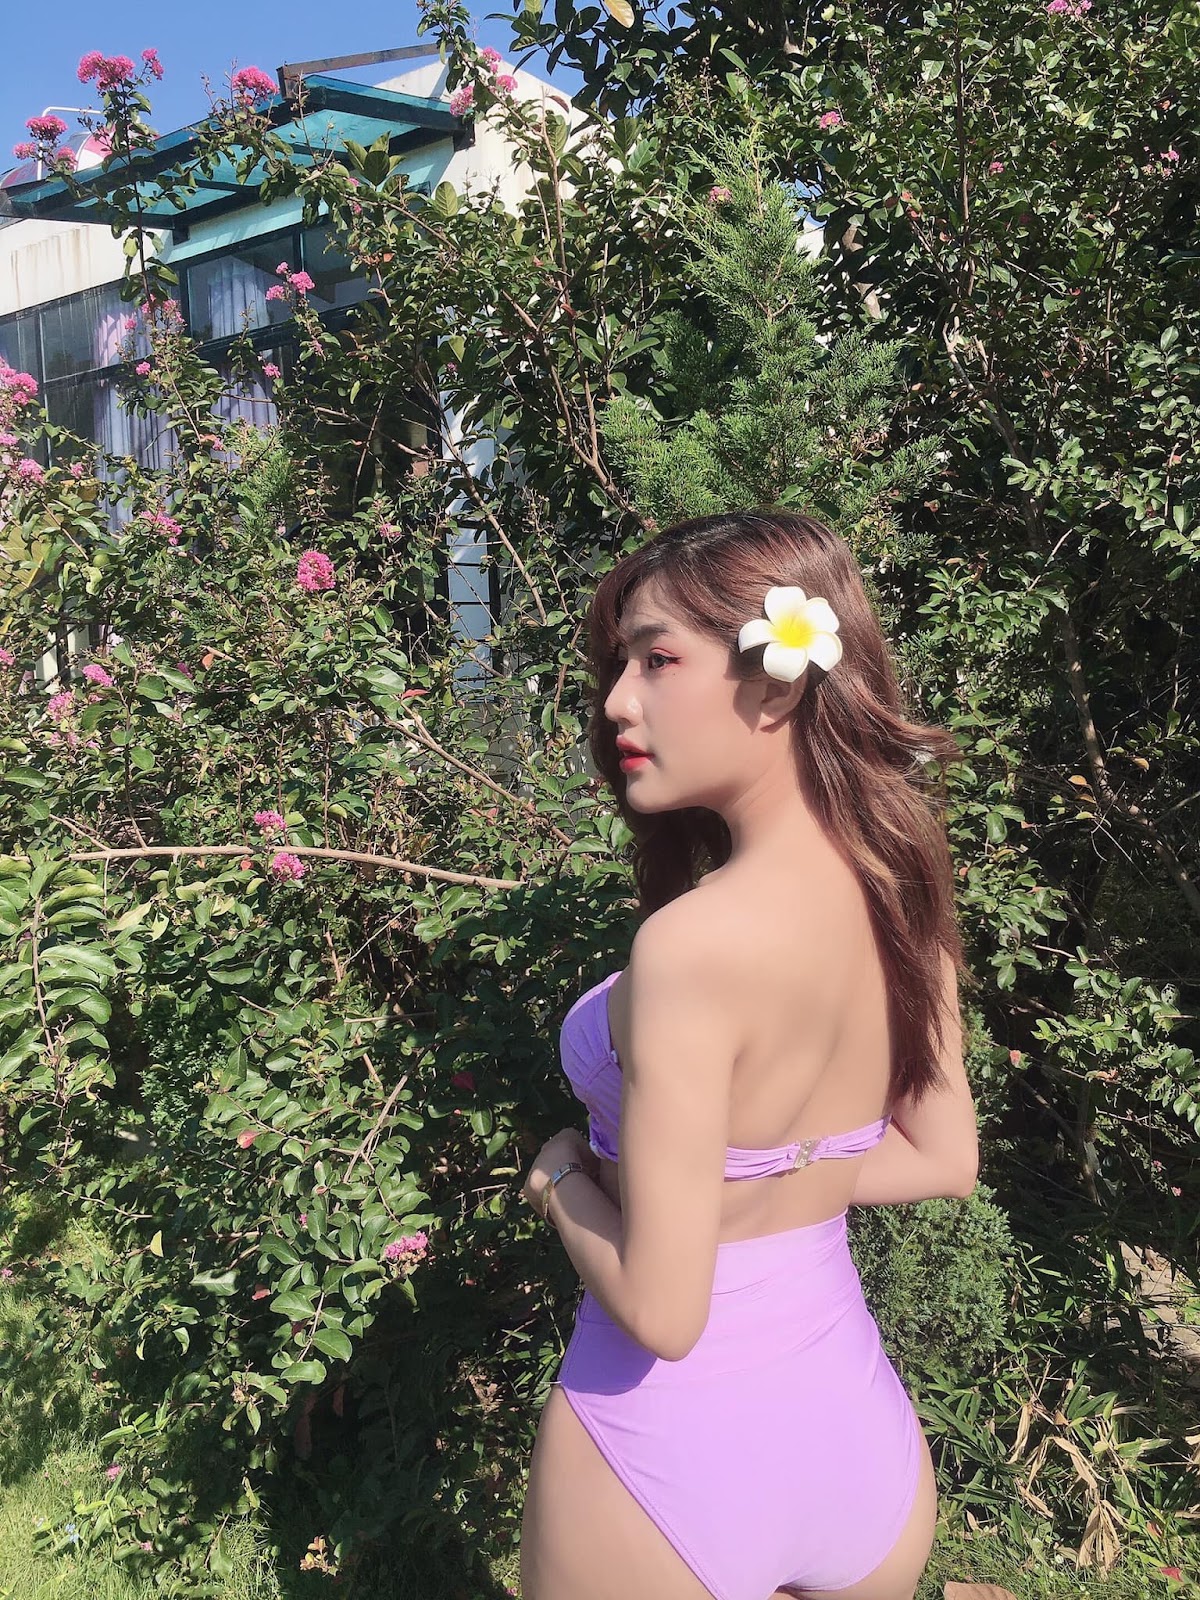 It's been a long time since she wore a bikini, female streamer Thao Anh still makes people teary-eyed with her curvaceous body - Photo 7.